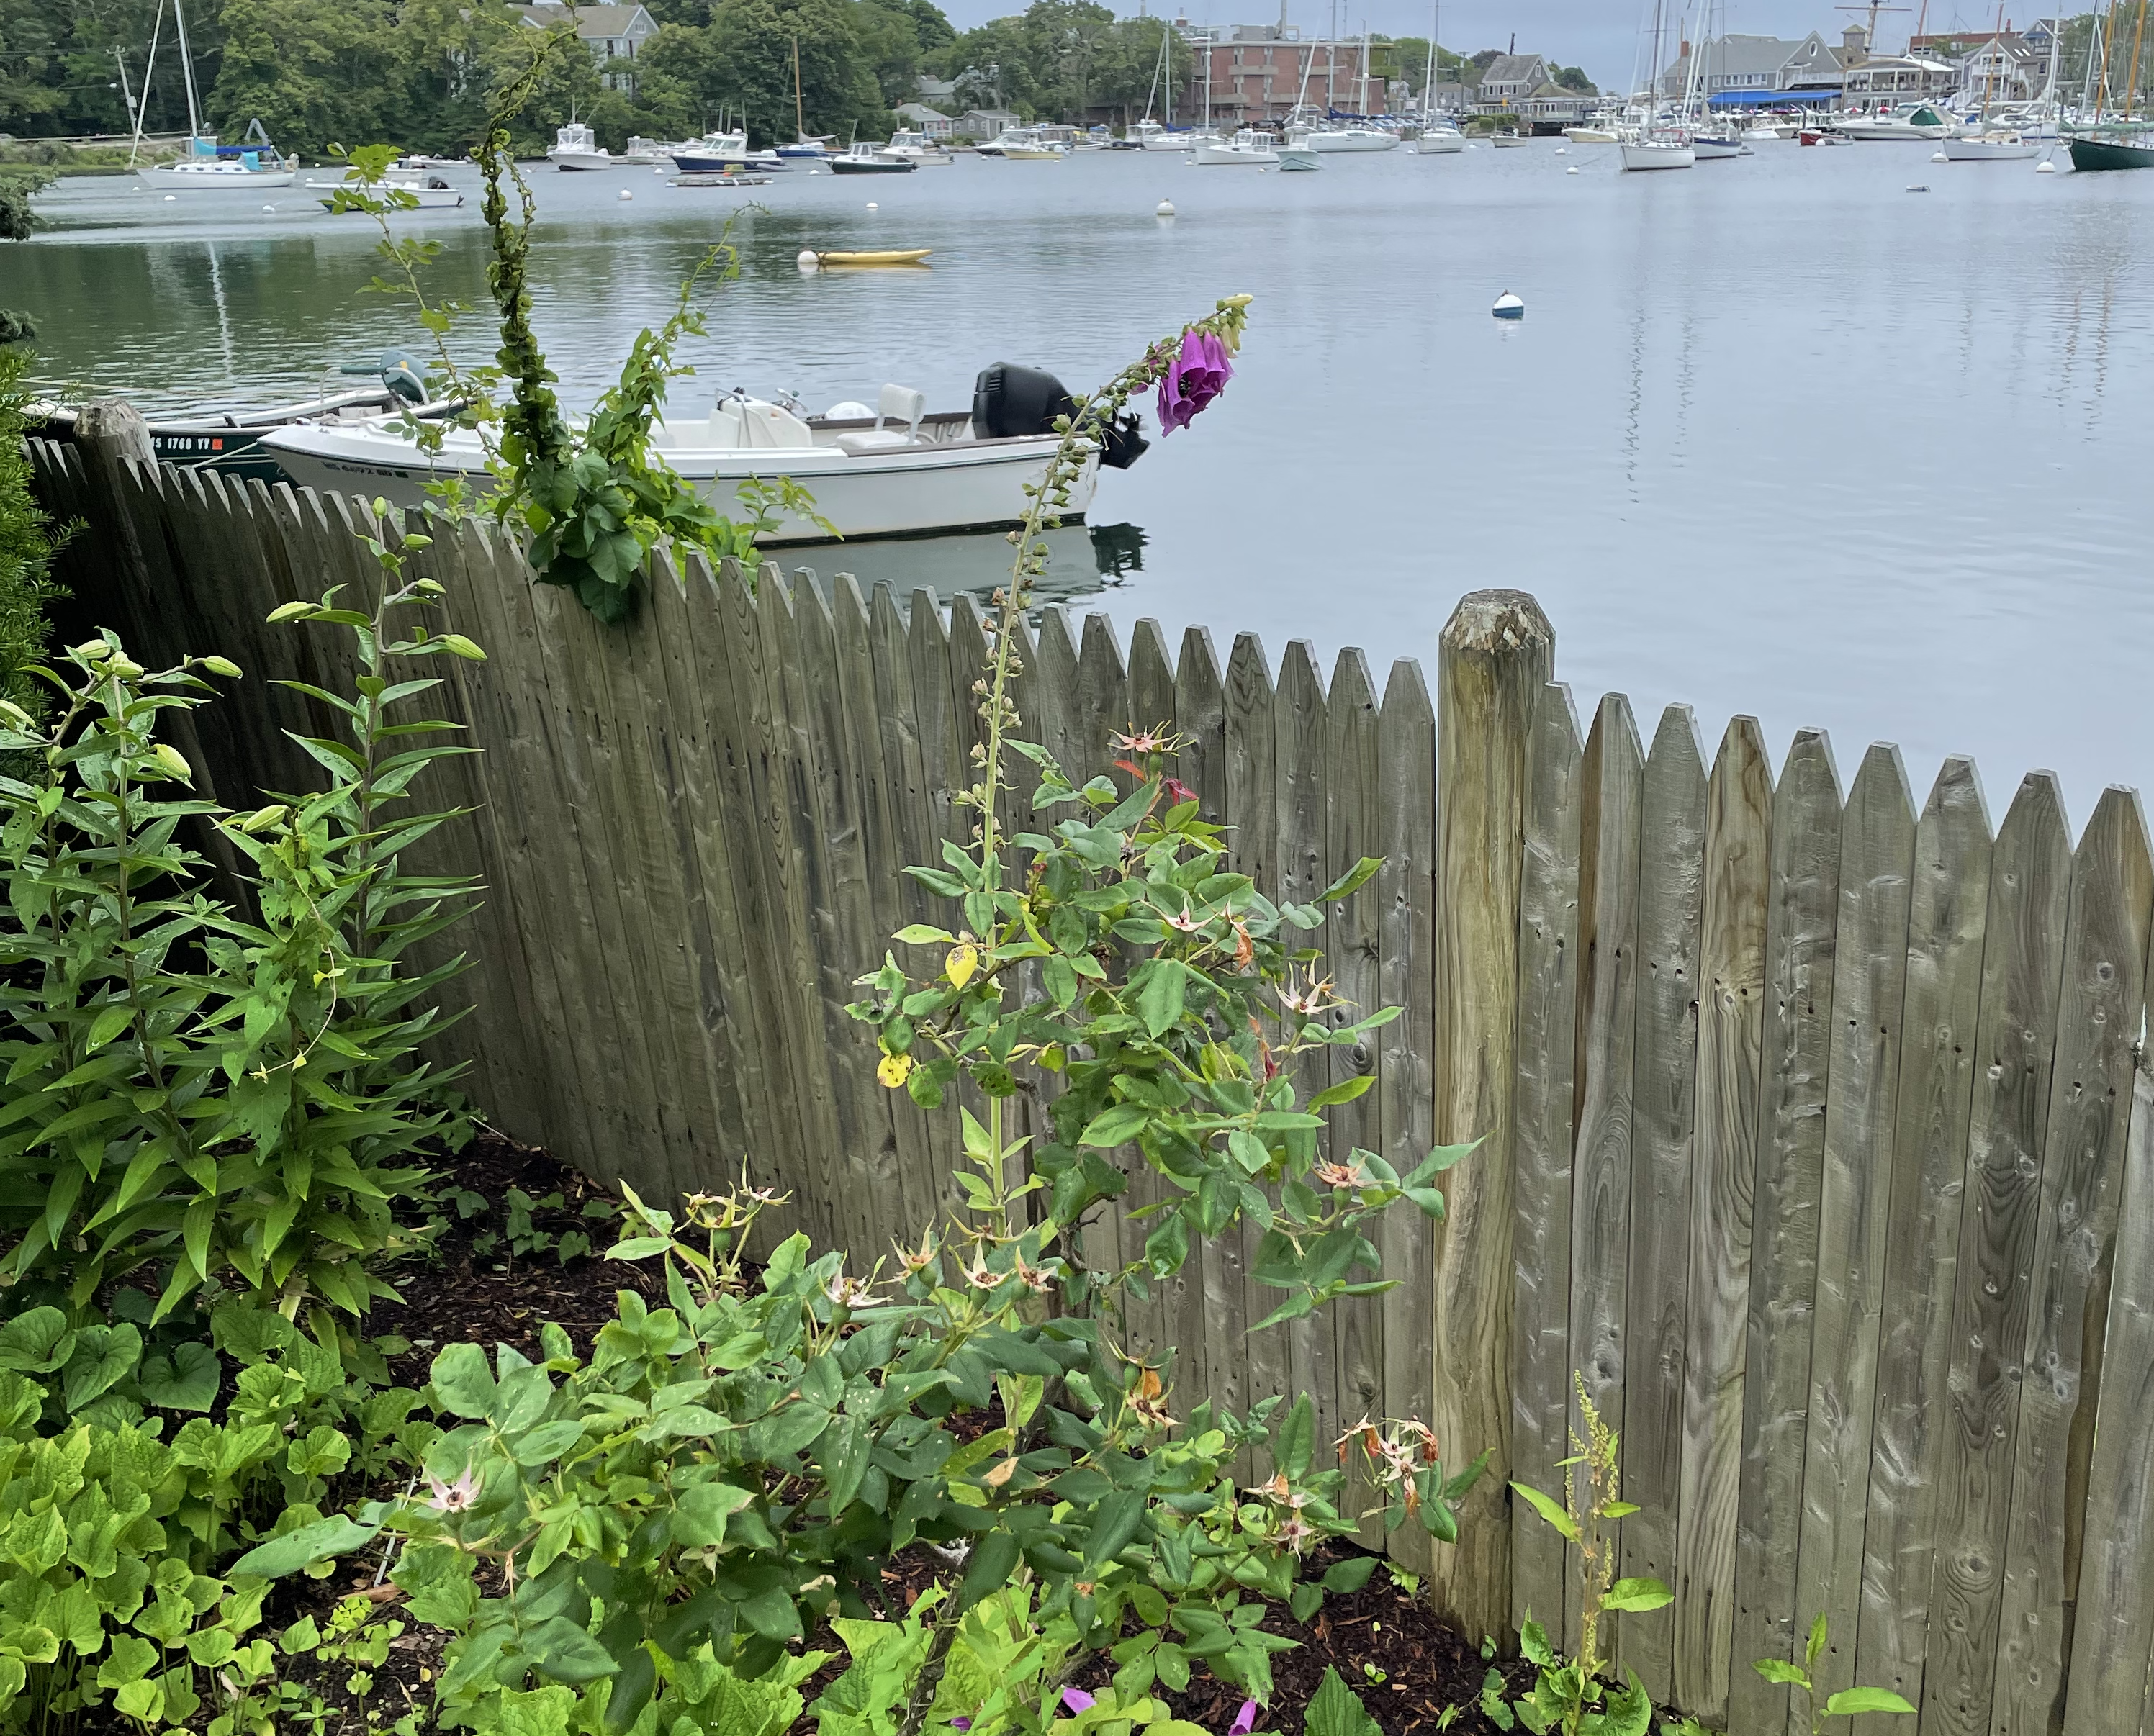 Photograph of foxglove with boats in the background